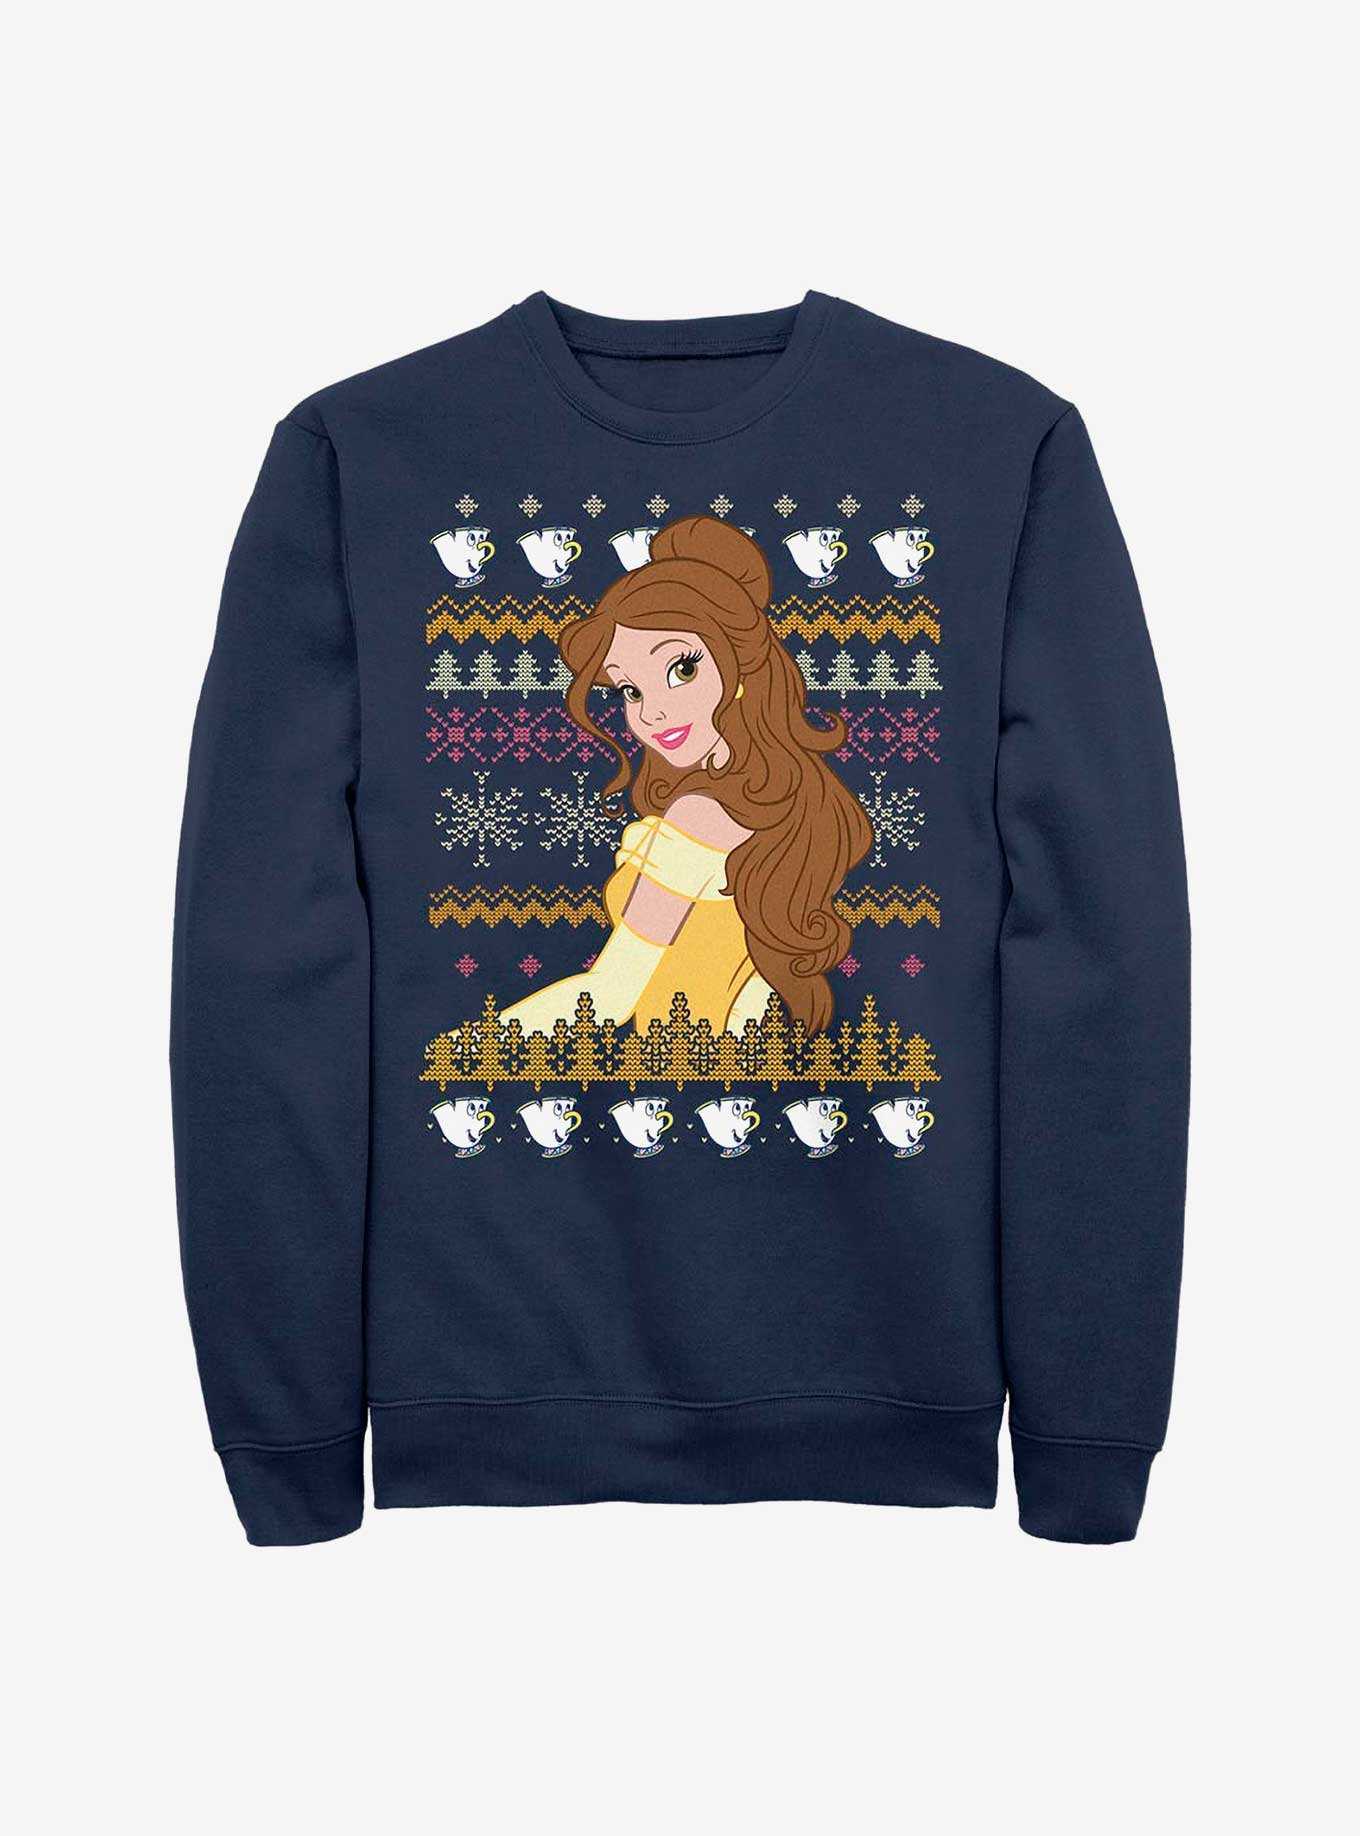 Disney Beauty And The Beast Belle Teacup Ugly Sweater Pattern Sweatshirt, , hi-res